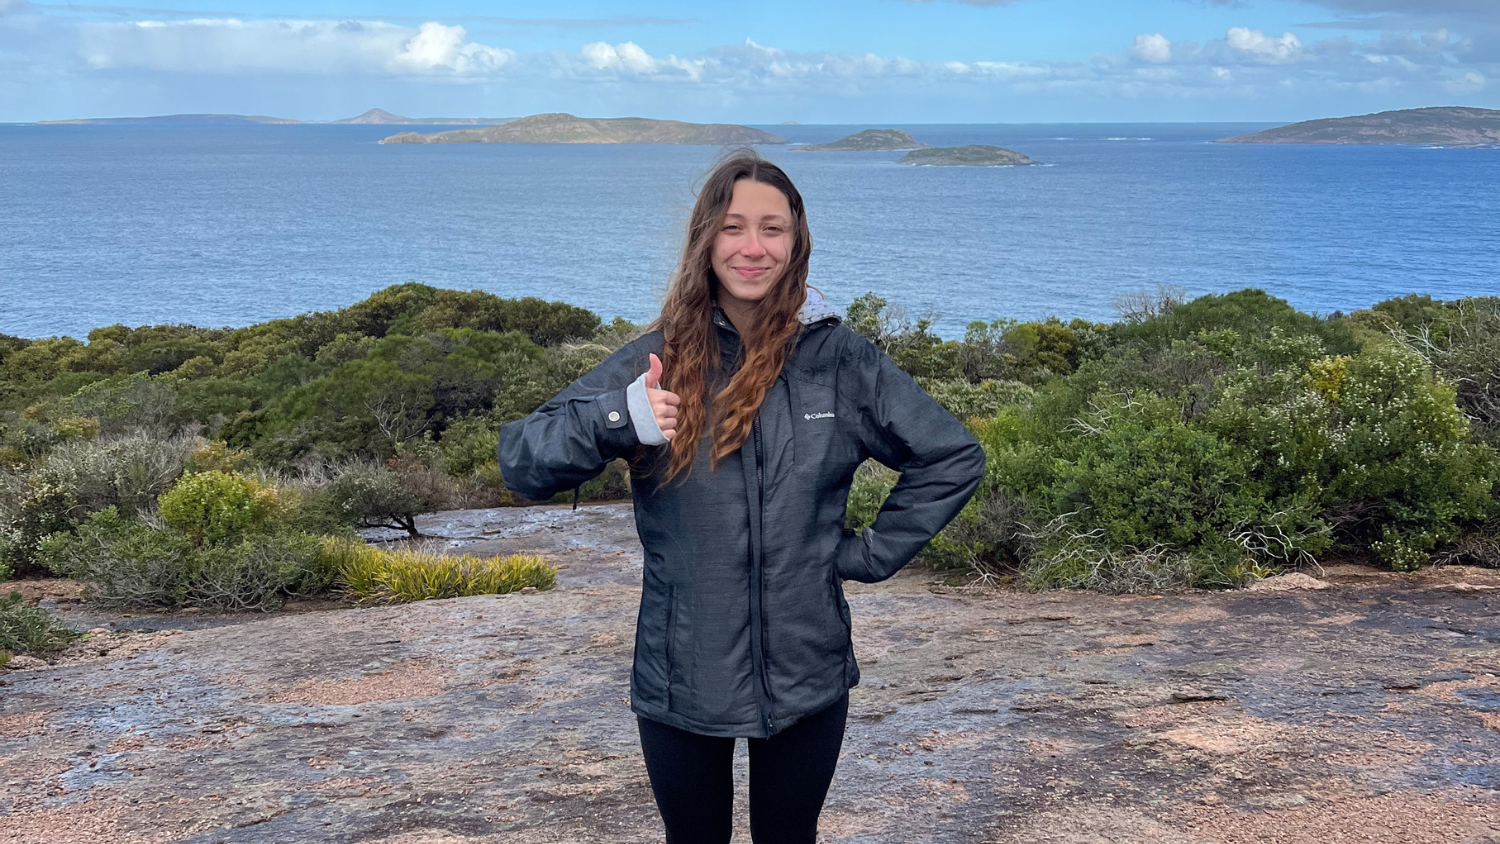 Tatiana standing on rocky and shrubby terrain with the ocean behind her- Tatiana Frontera’s Semester in Australia - Forestry and Environmental Resources at NC State University